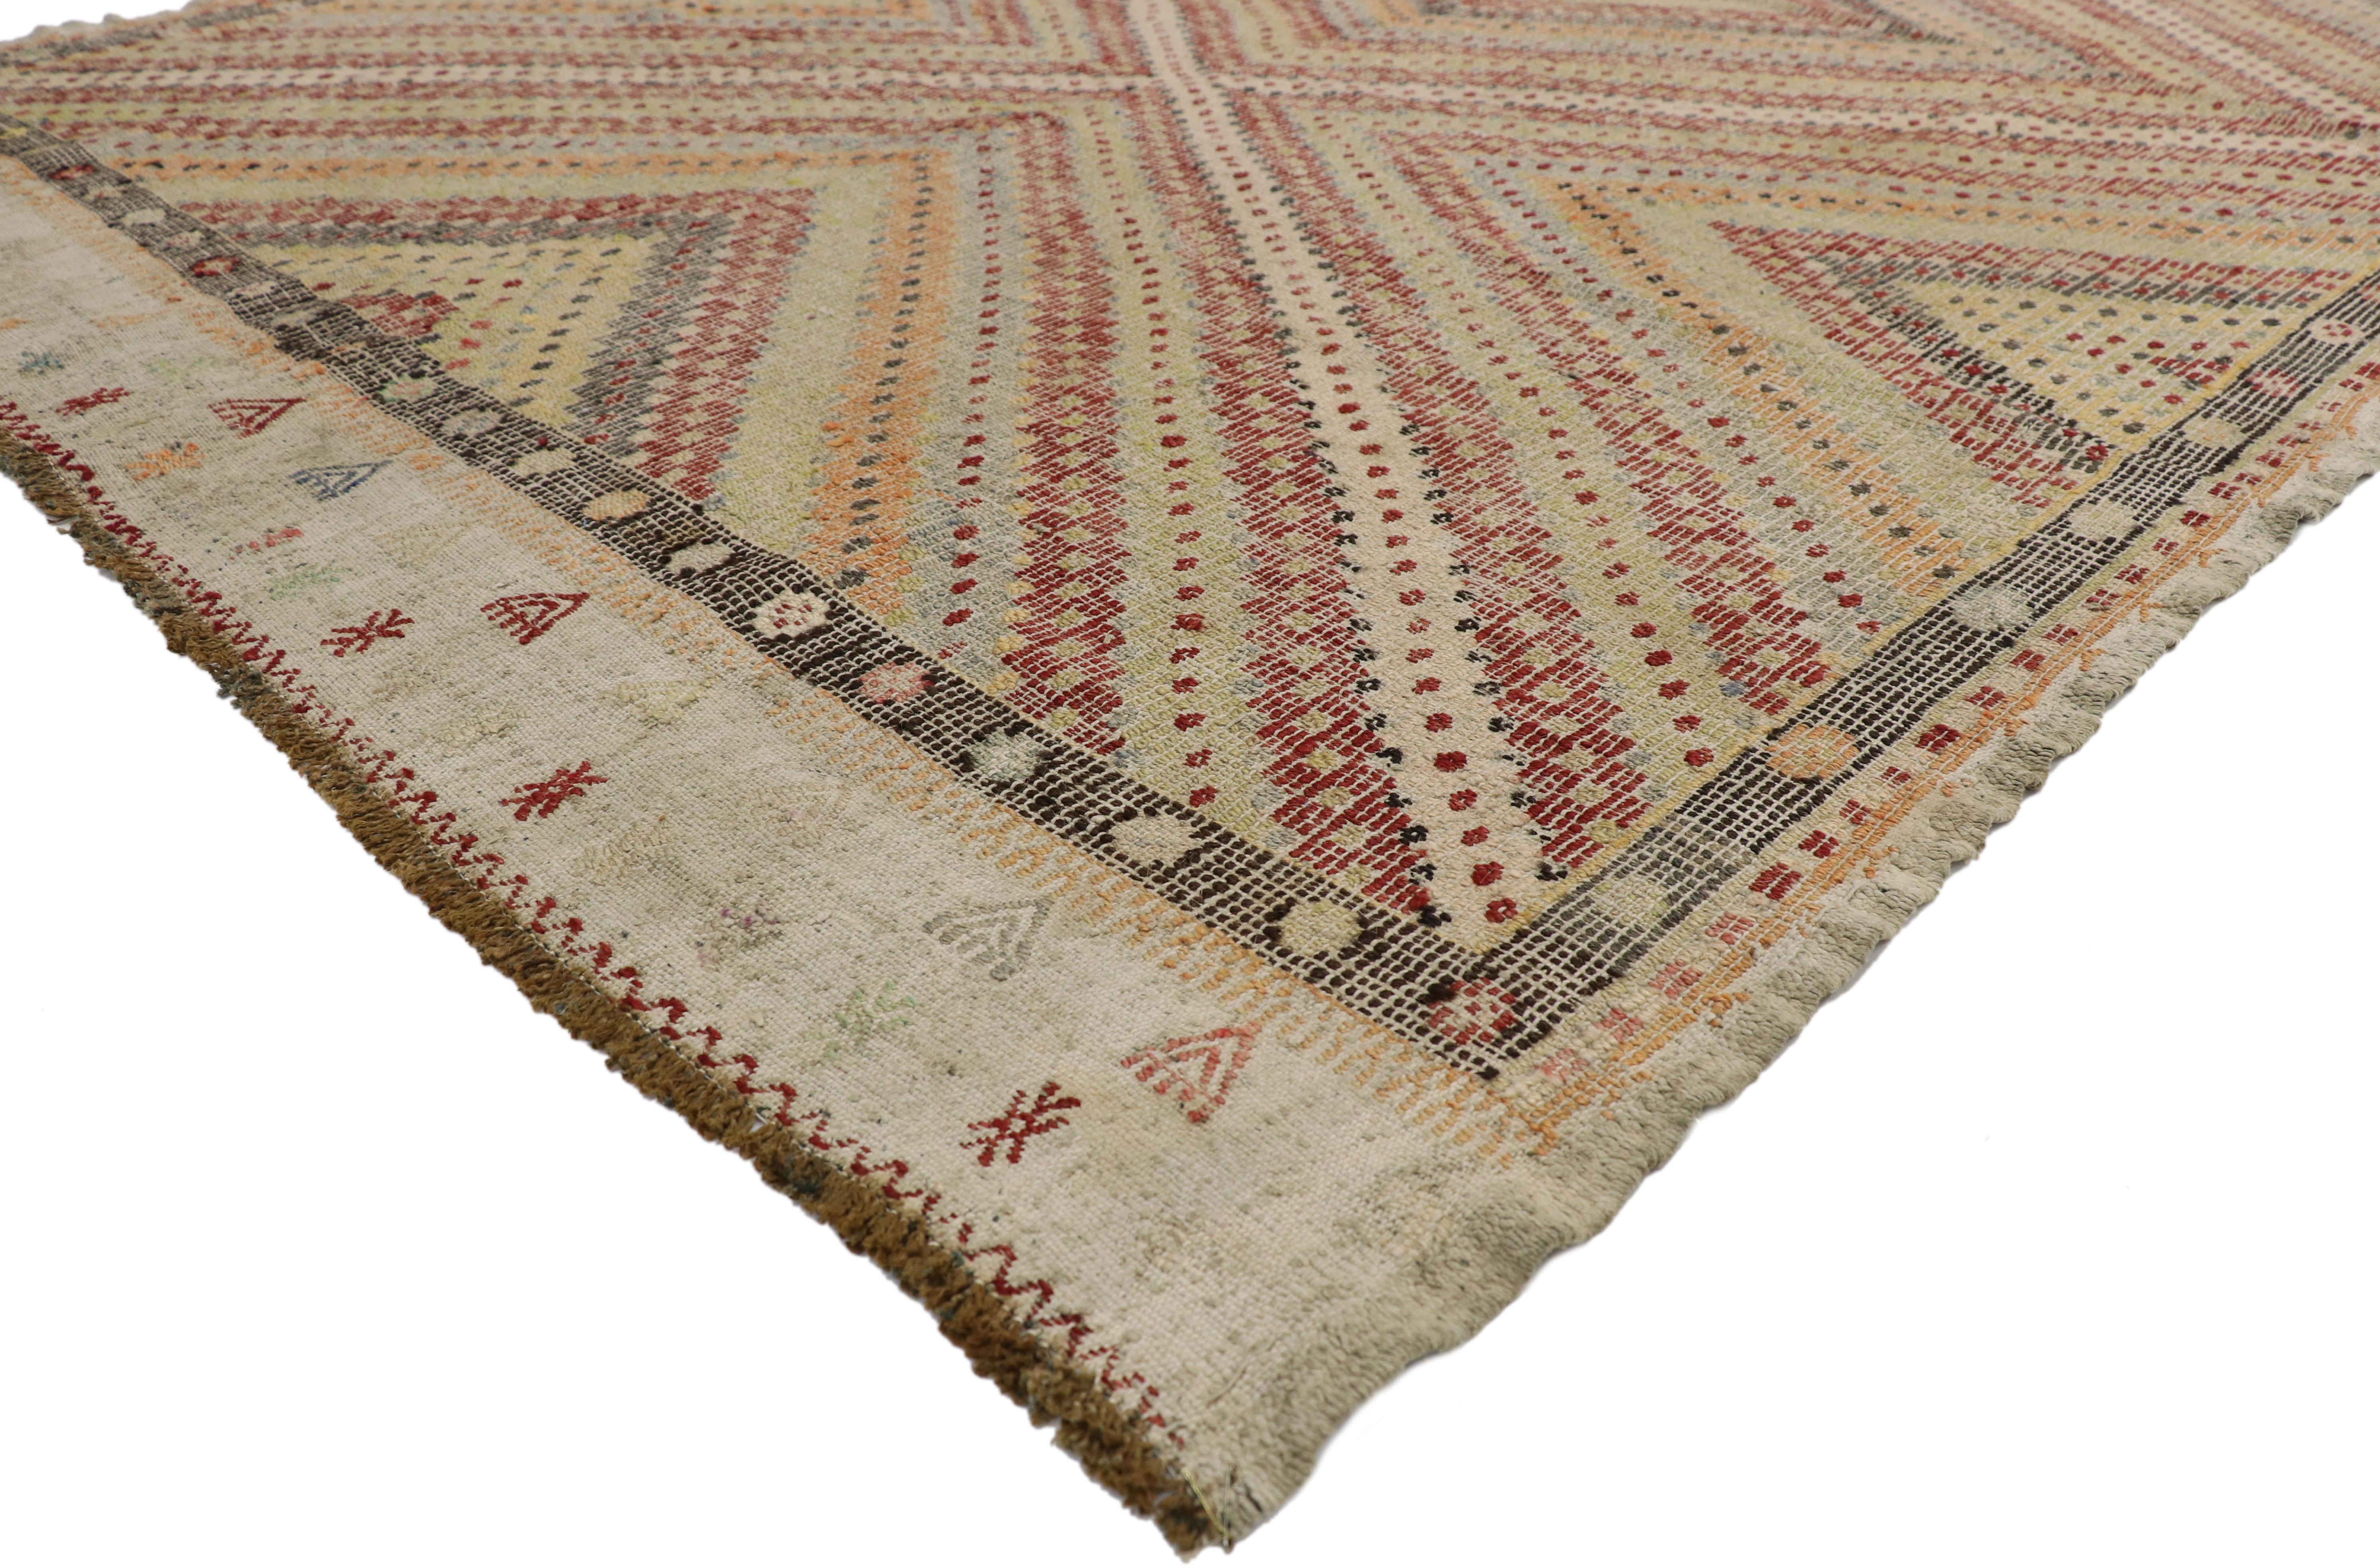 Distressed Vintage Turkish Kilim Rug with Southern Living British Colonial Style For Sale 2